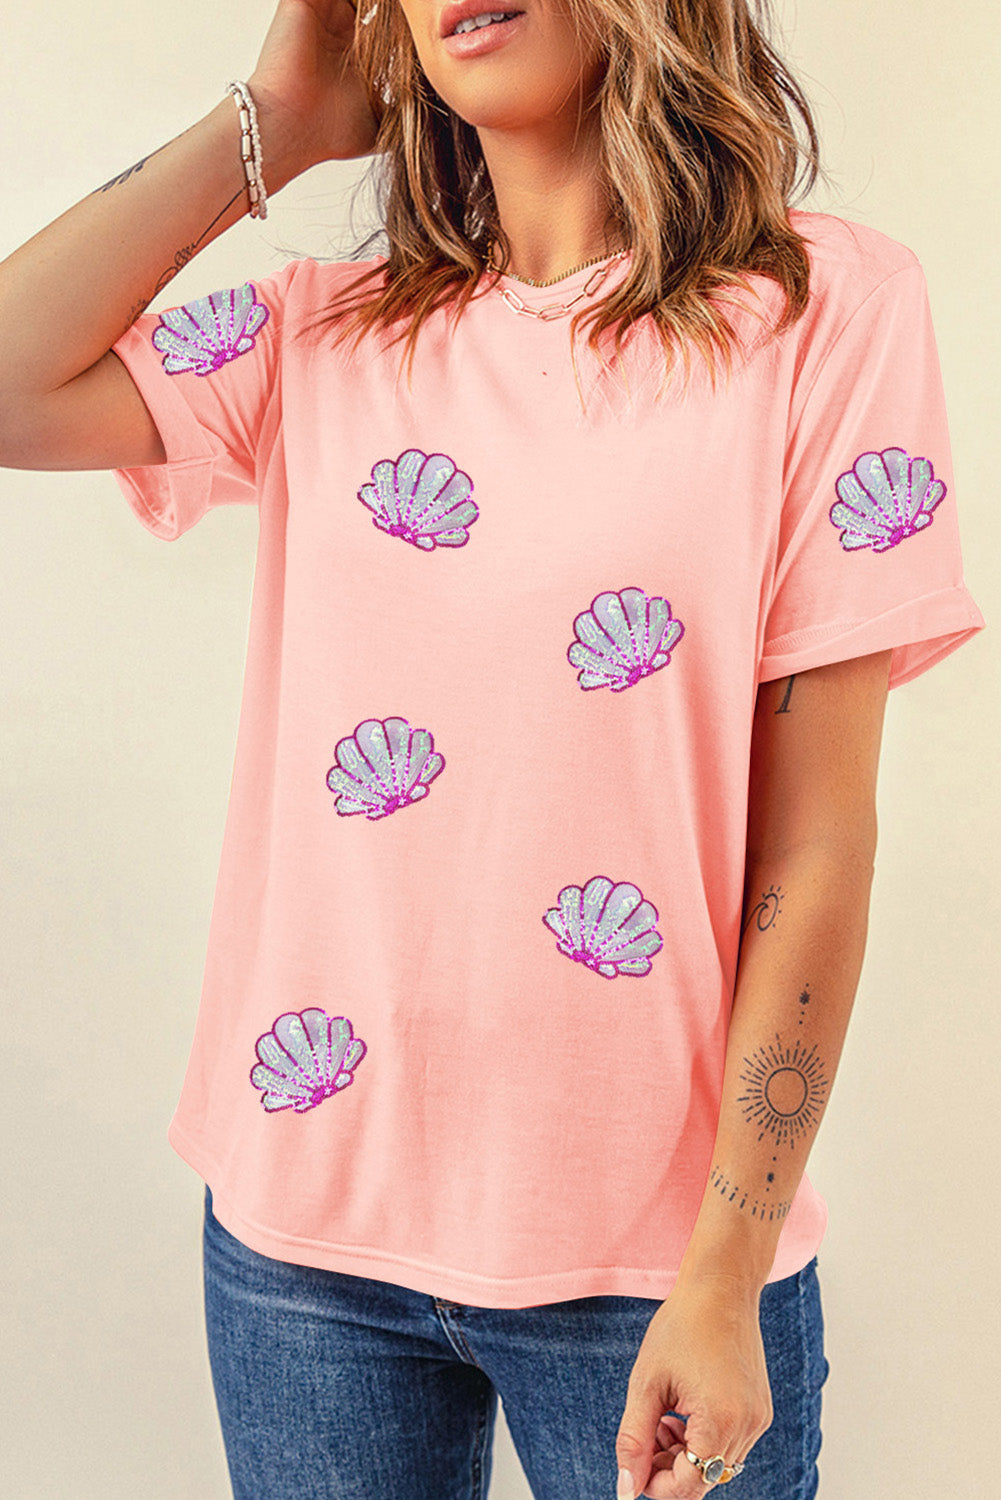 She Sells Seashells Sequin Tee - Cheeky Chic Boutique